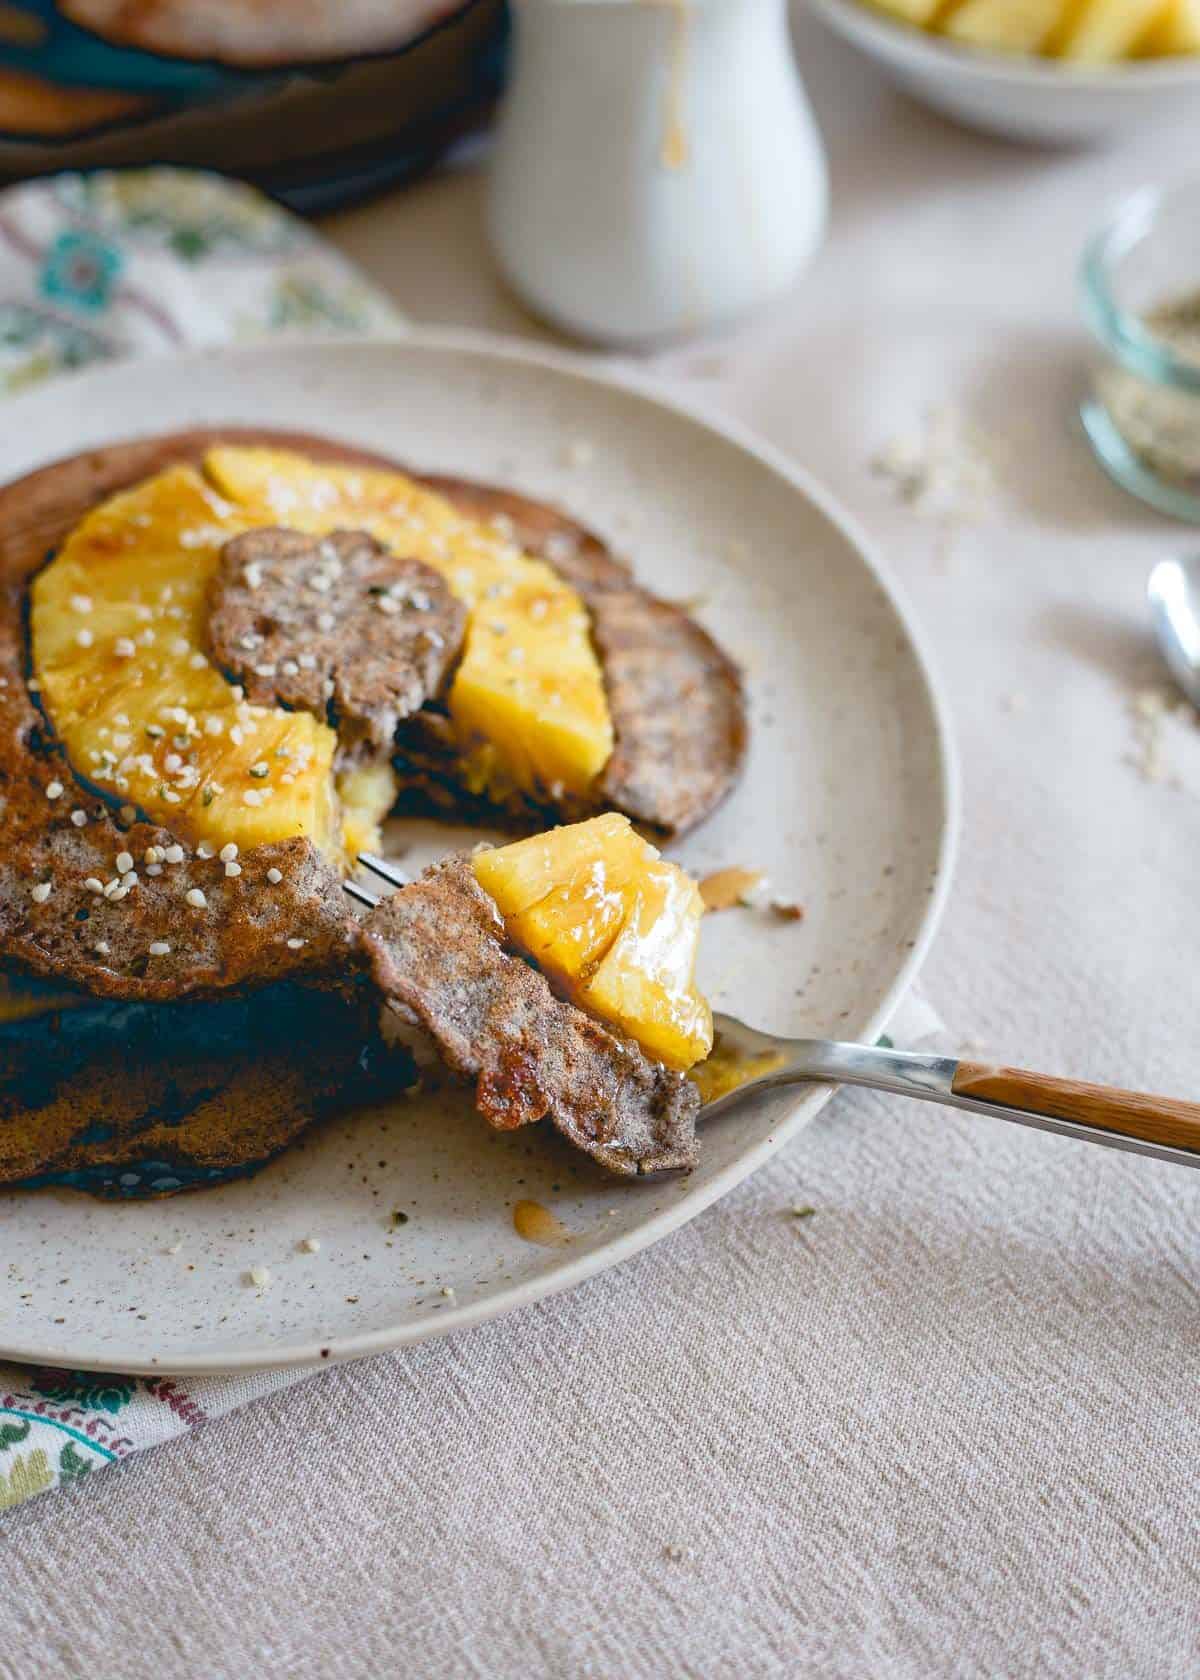 Pineapple buckwheat pancakes on a plate with a fork.